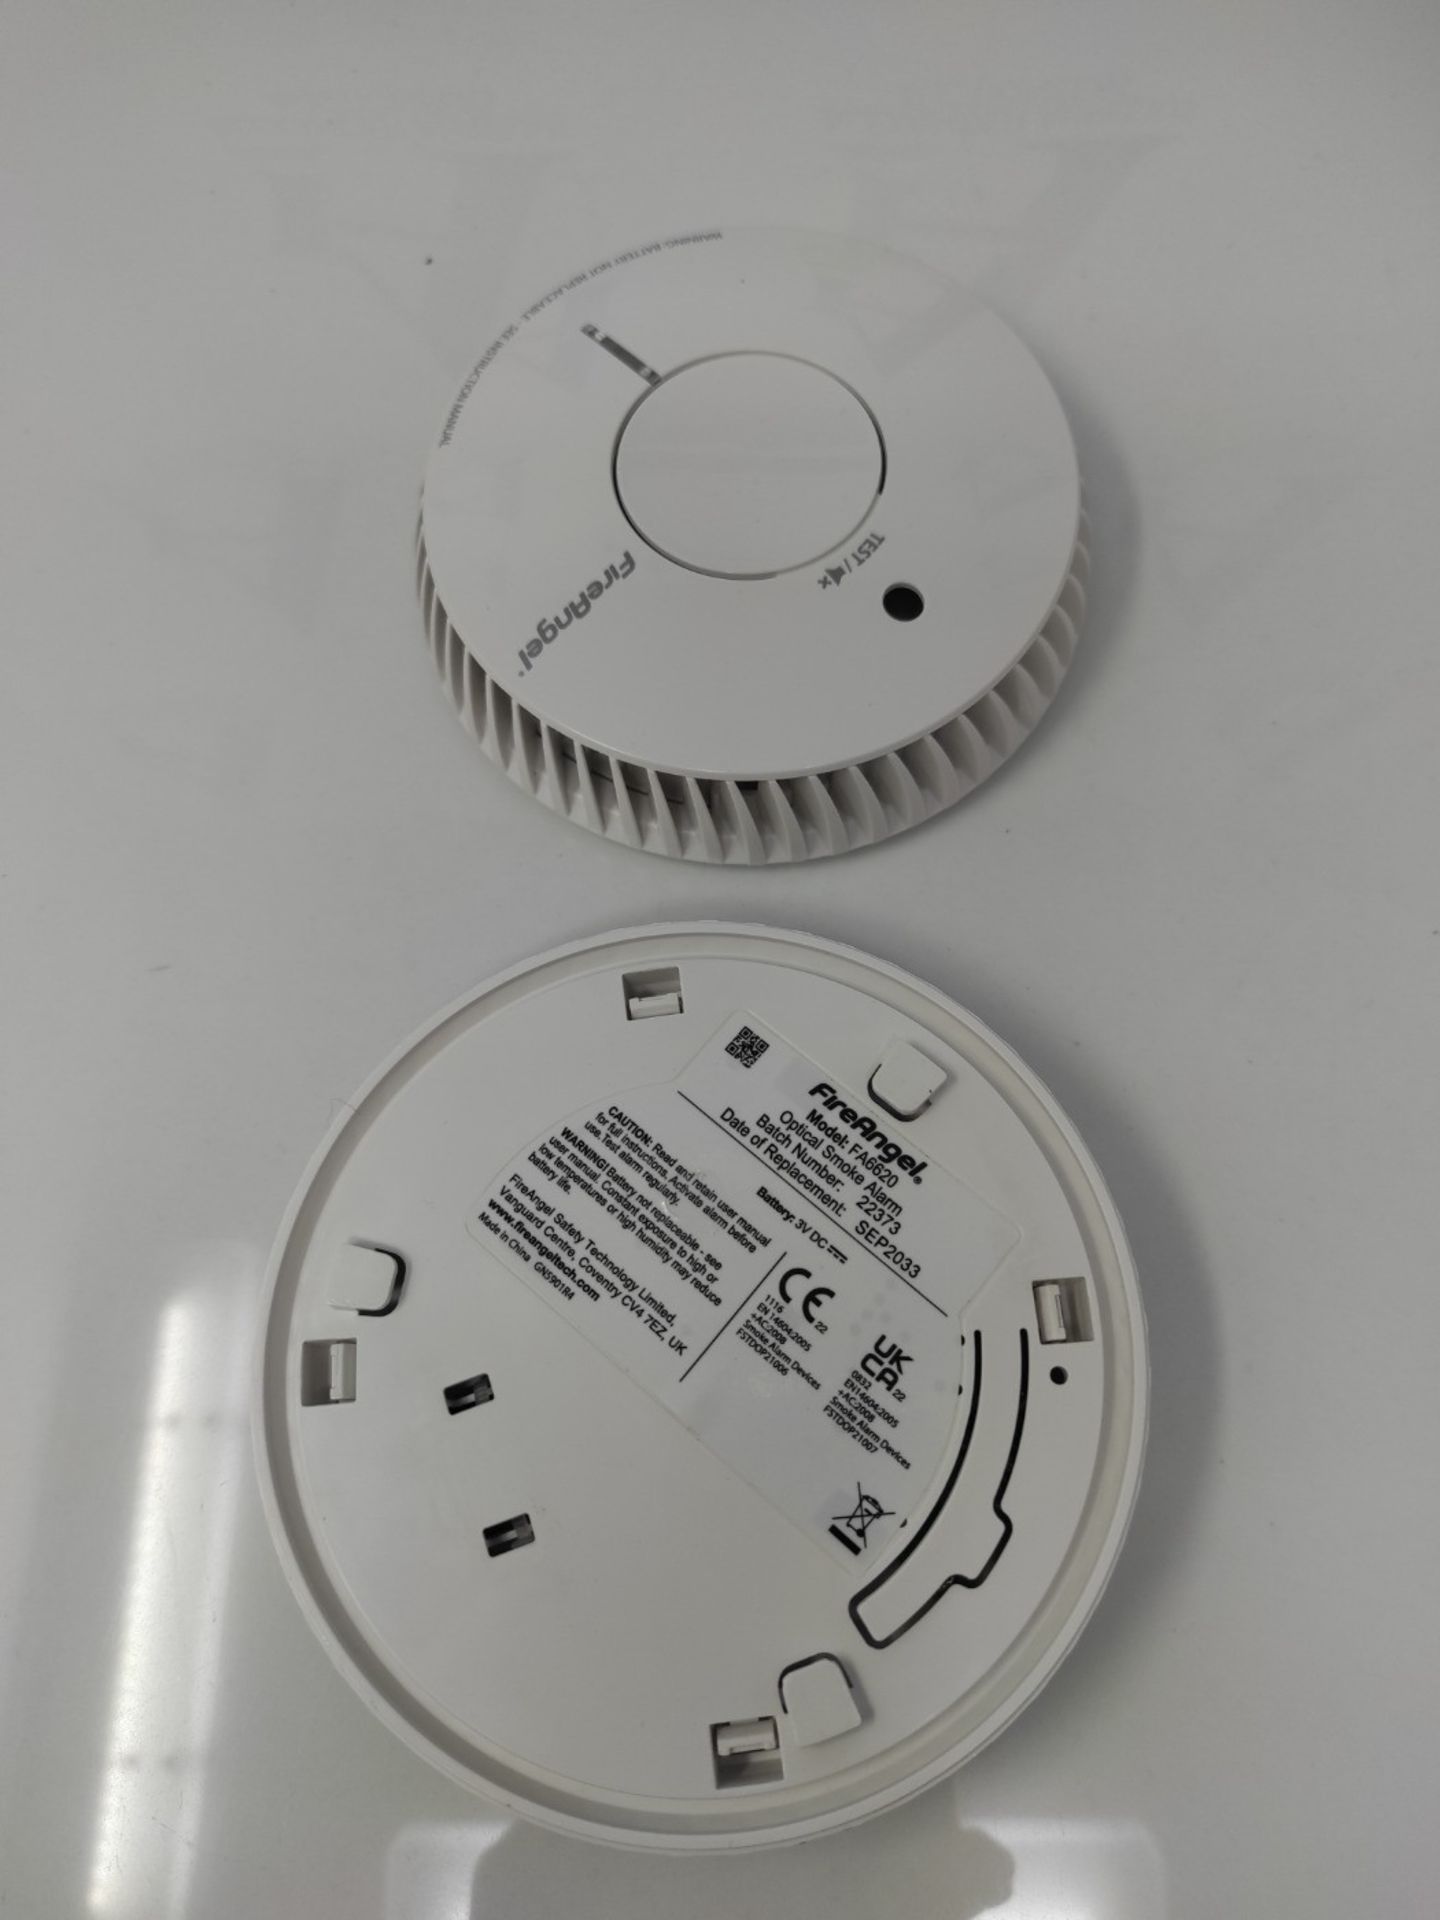 FireAngel Optical Smoke Alarm with 10 Year Sealed For Life Battery, FA6620-R-T2 (ST-62 - Image 2 of 2